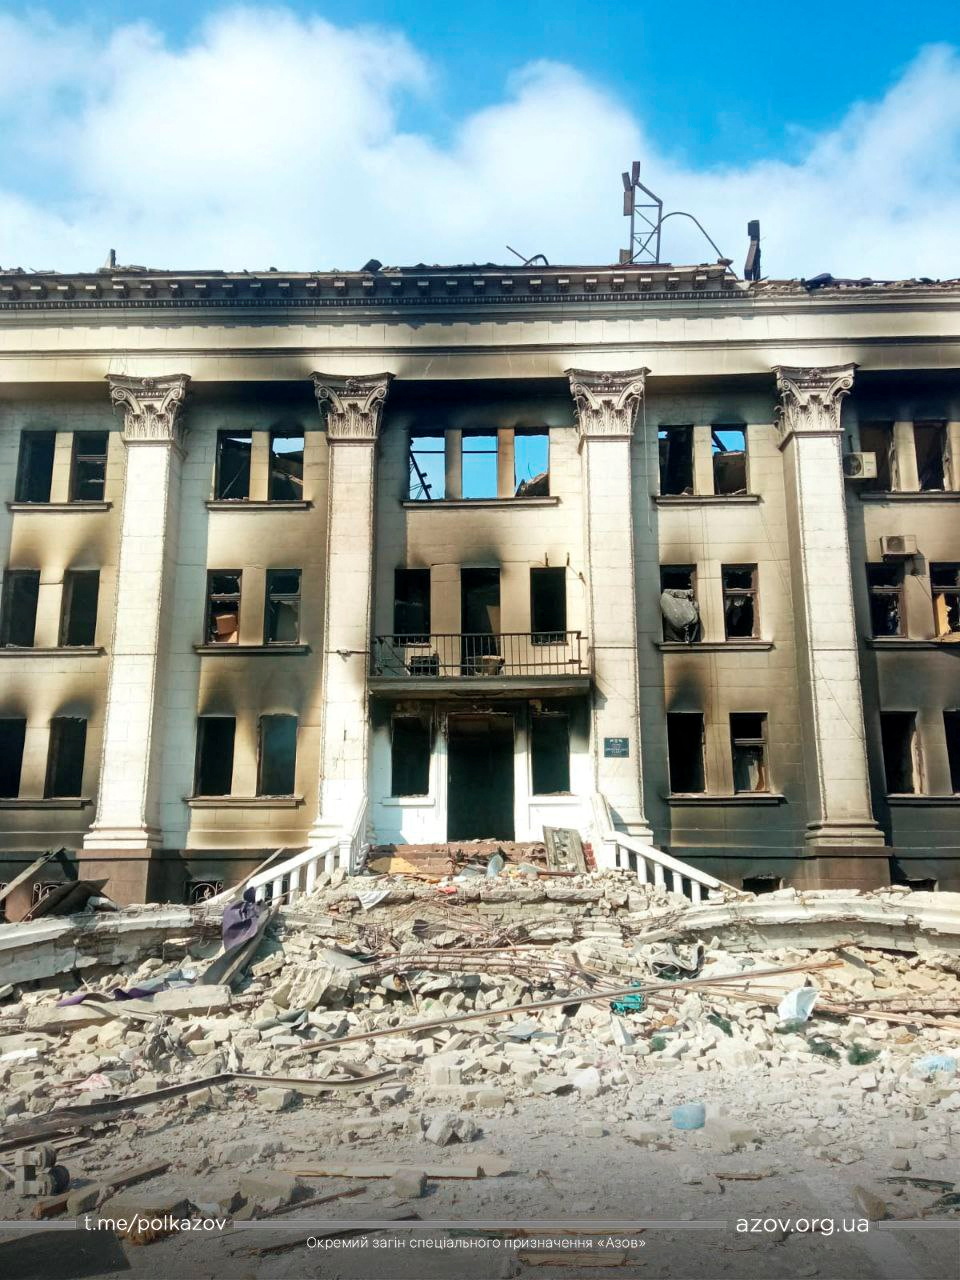 Aftermath of bombing in Mariupol drama theatre